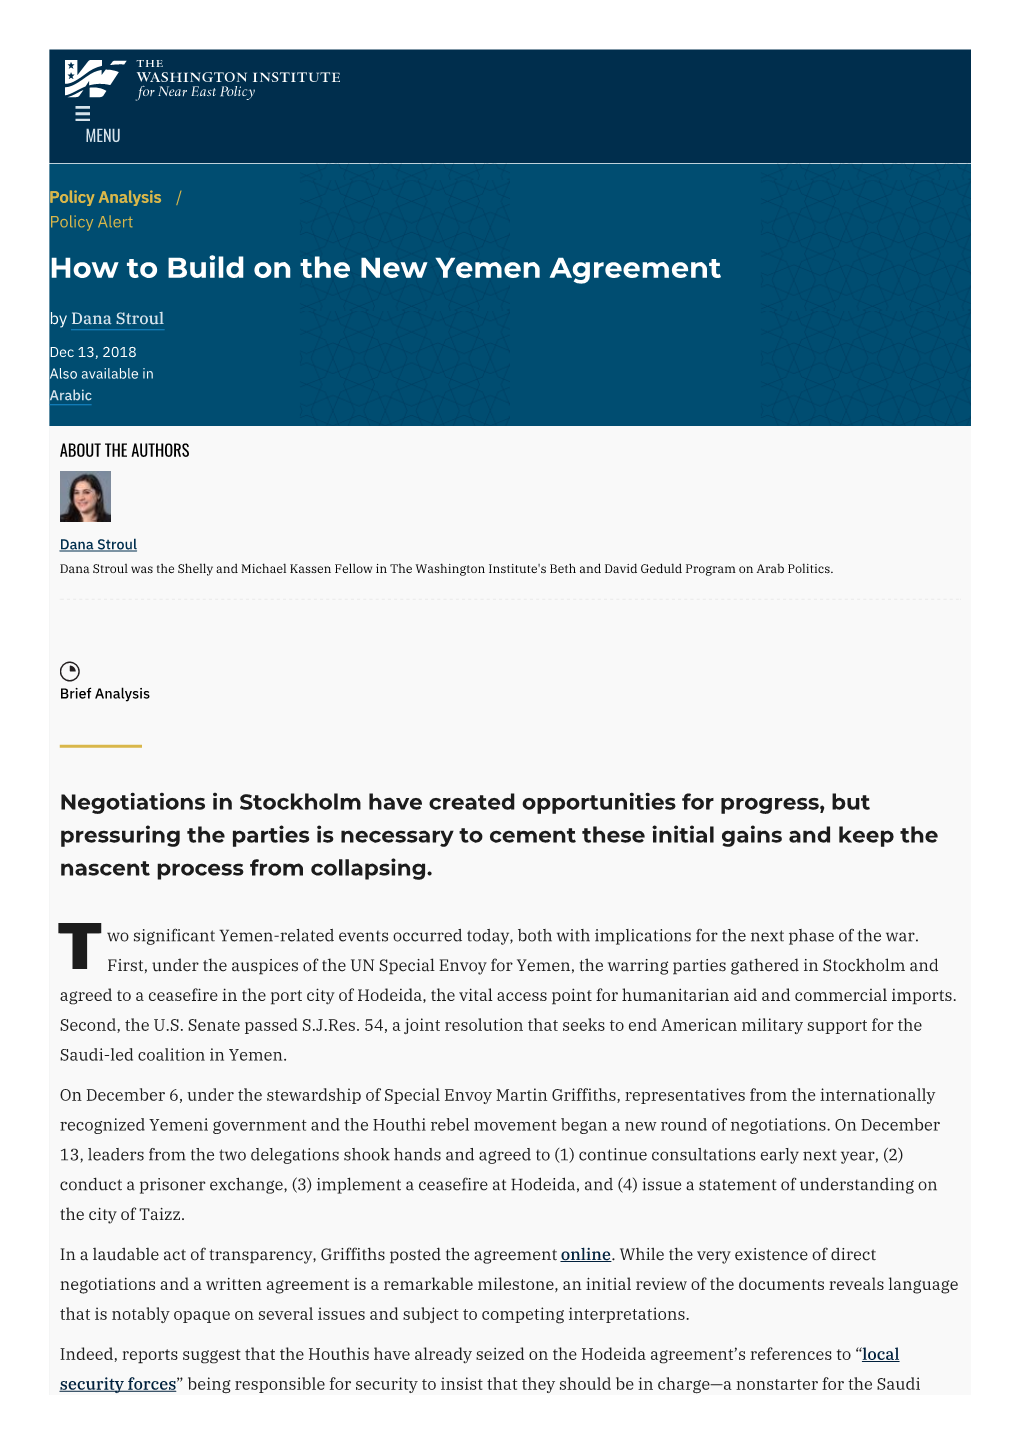 How to Build on the New Yemen Agreement | the Washington Institute